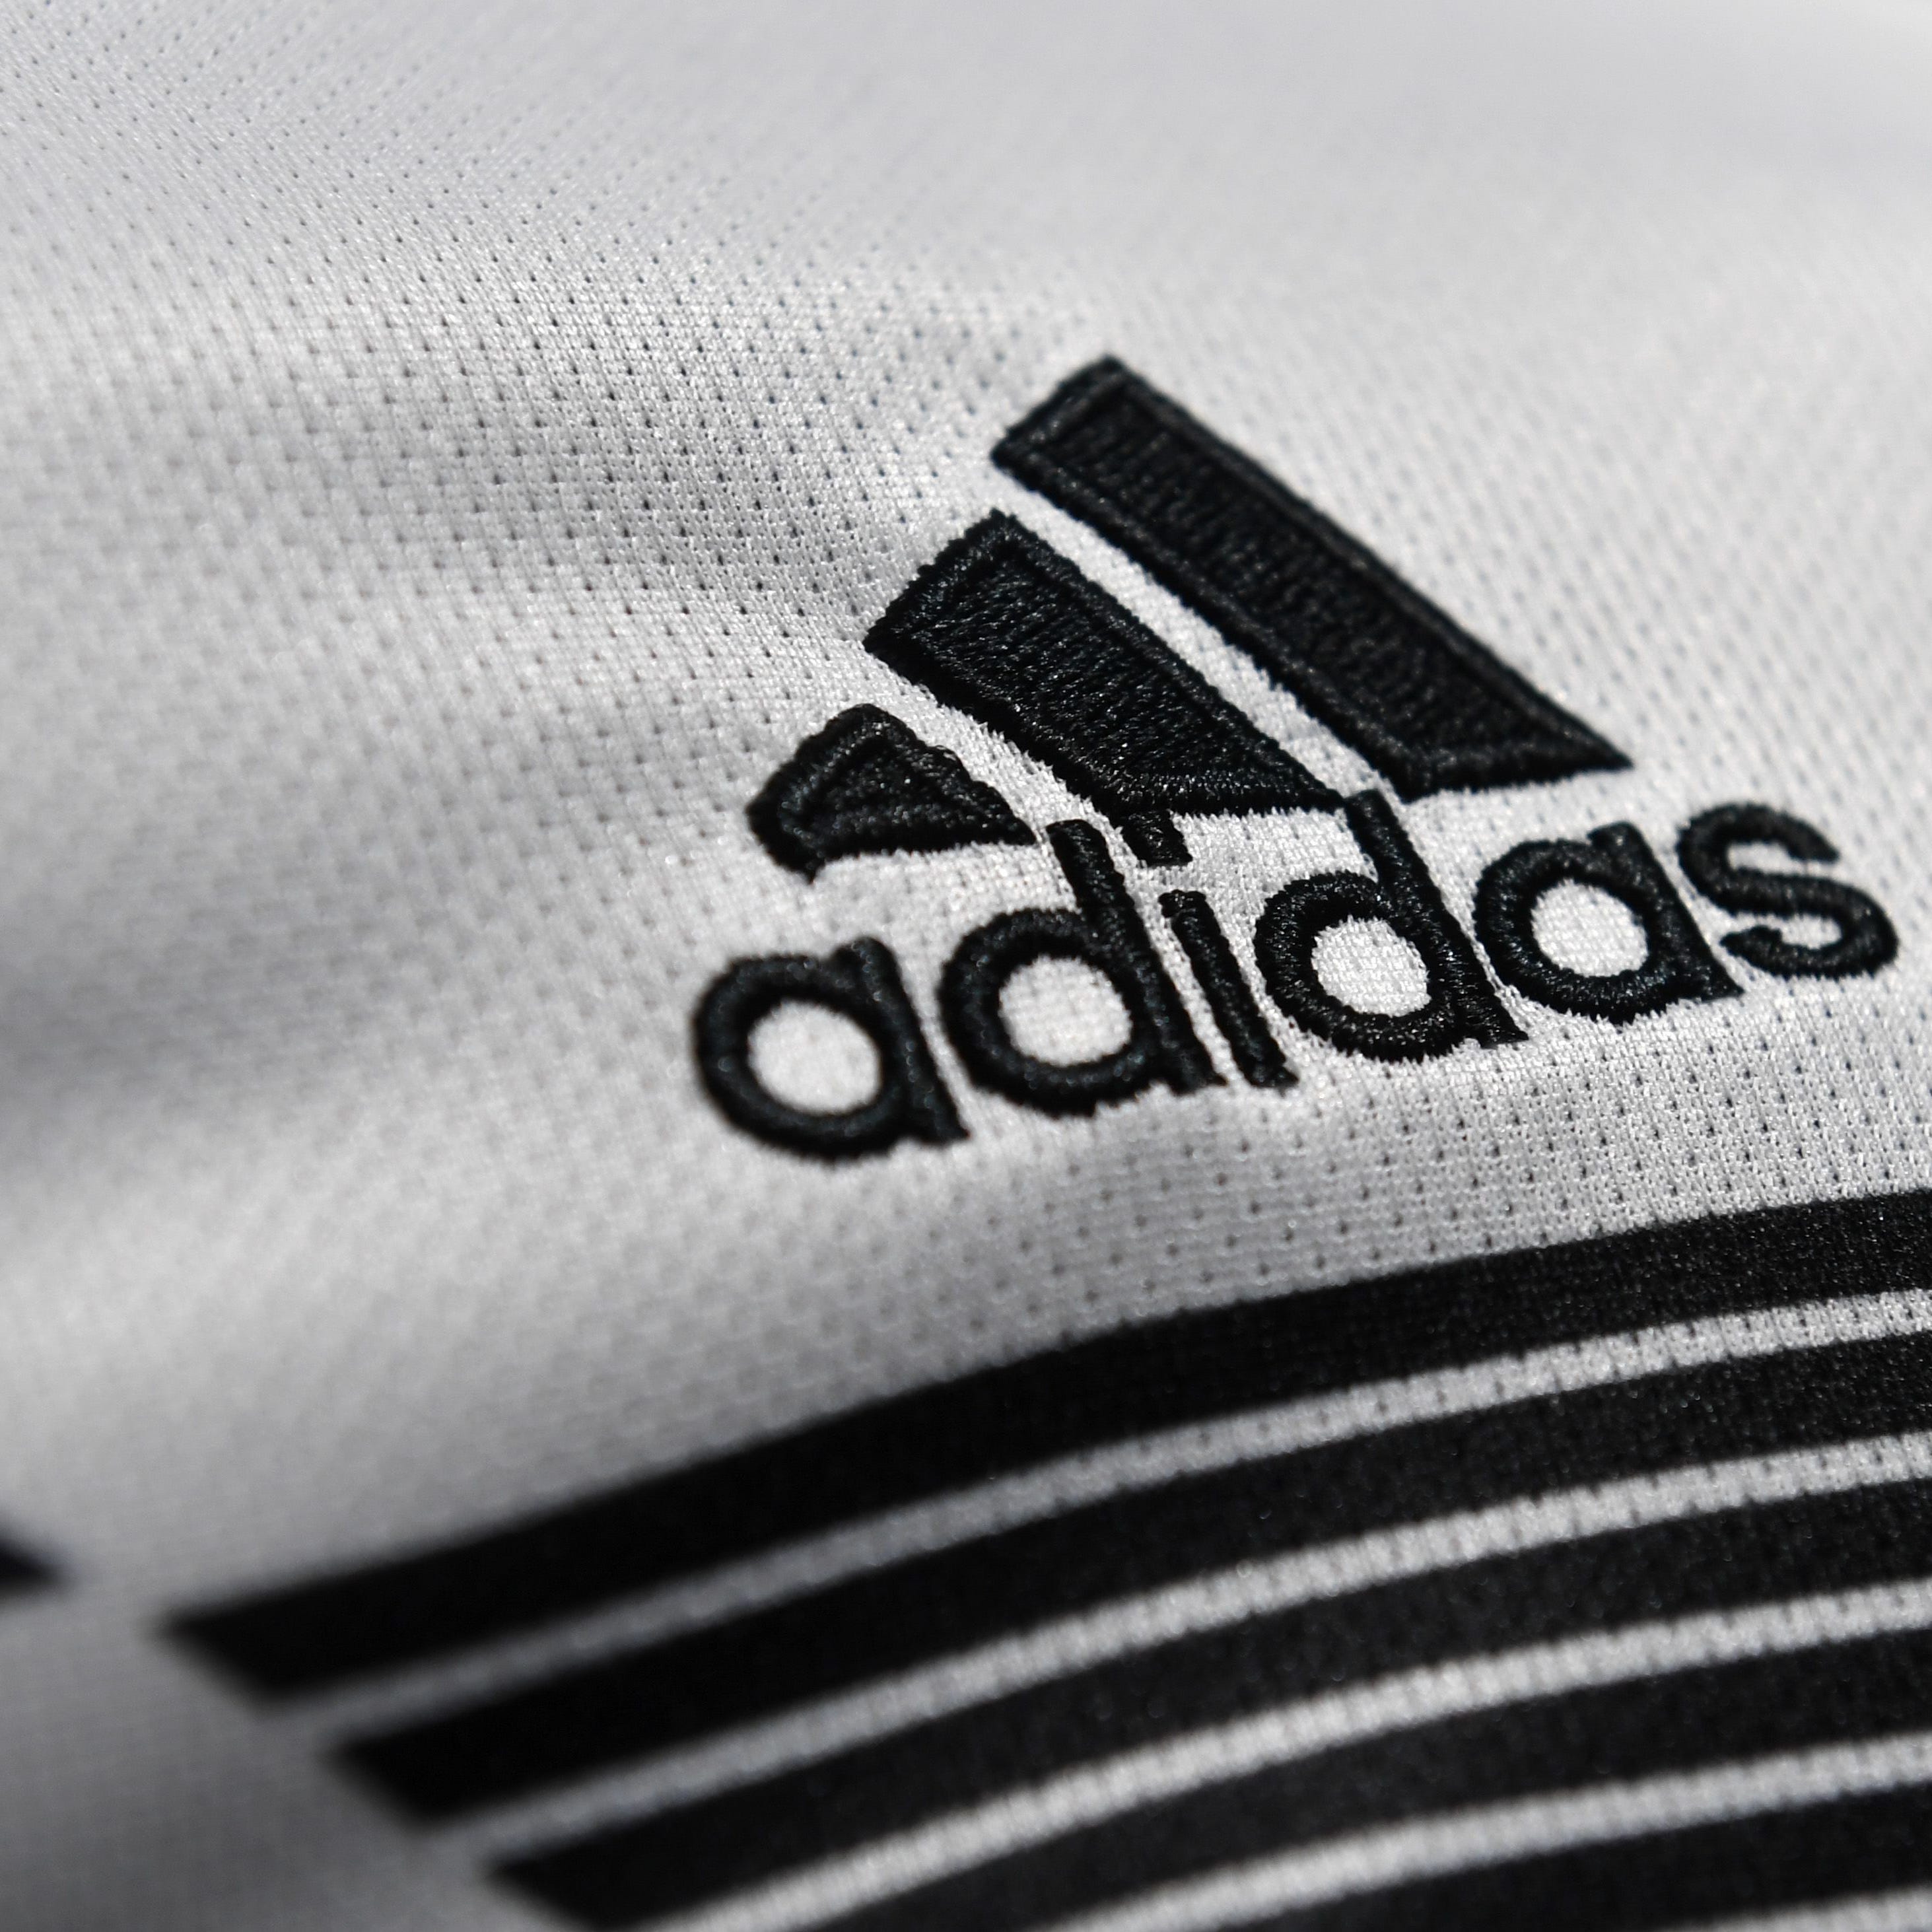 The Adidas company logo is on display during the company's annual press conference of Germany's sportgoods company Adidas in Herzogenaurach, southern Germany, on March 14, 2018.The company uses apps and other channels to sell directly to customers, rather than just offering its products in third party stores.